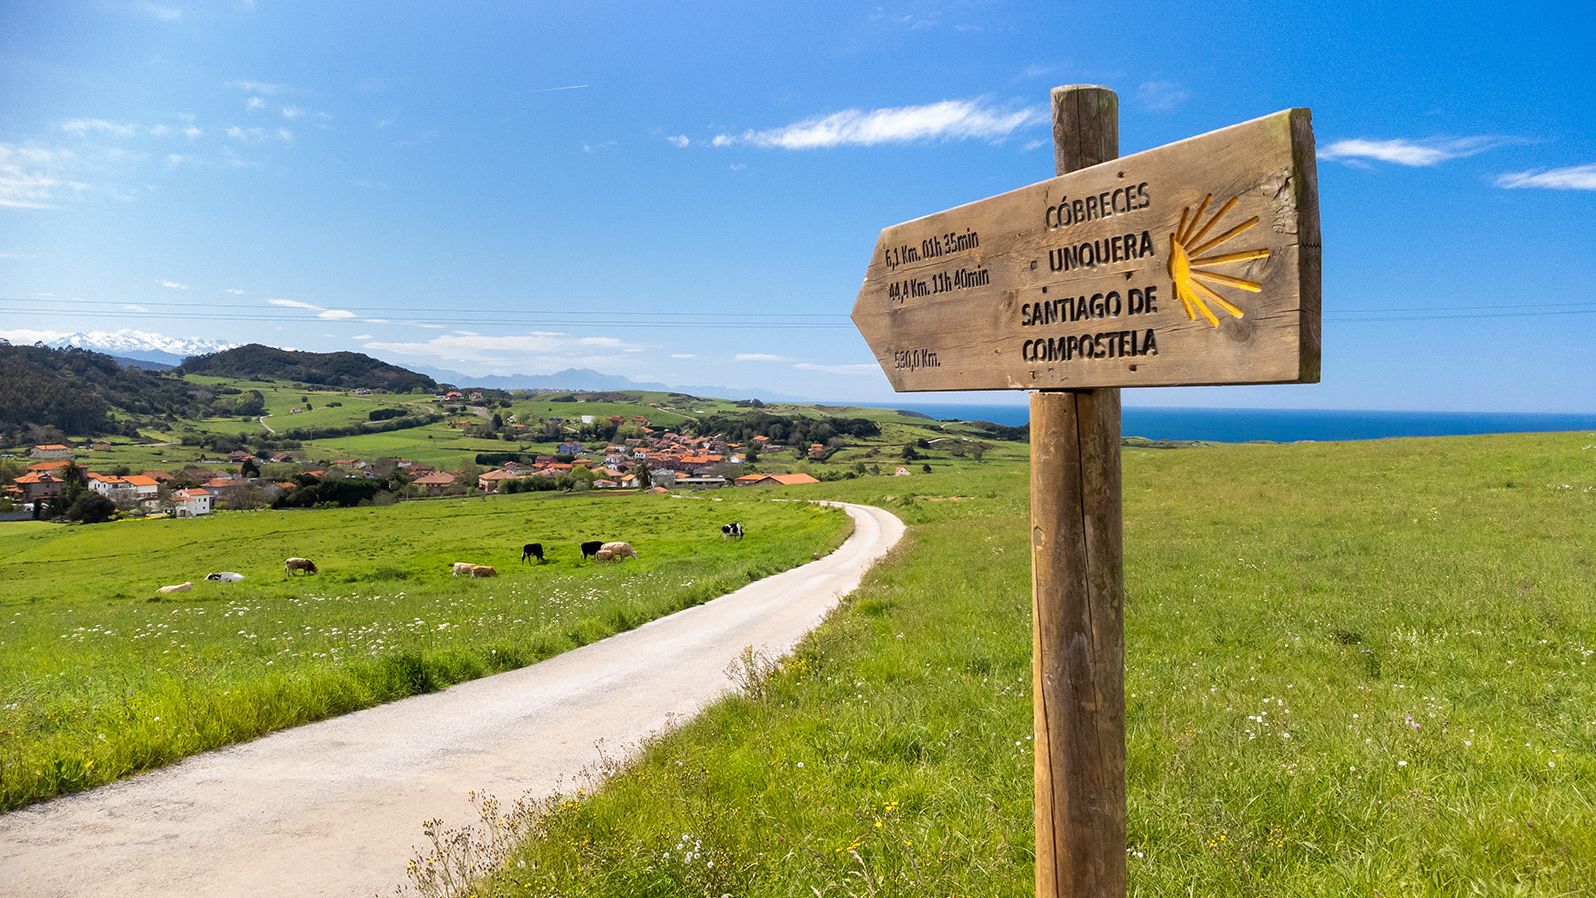 Wooden milestone indicating kilometers to Unquera and Cobreces during the route of the Camino de Santiago. no people